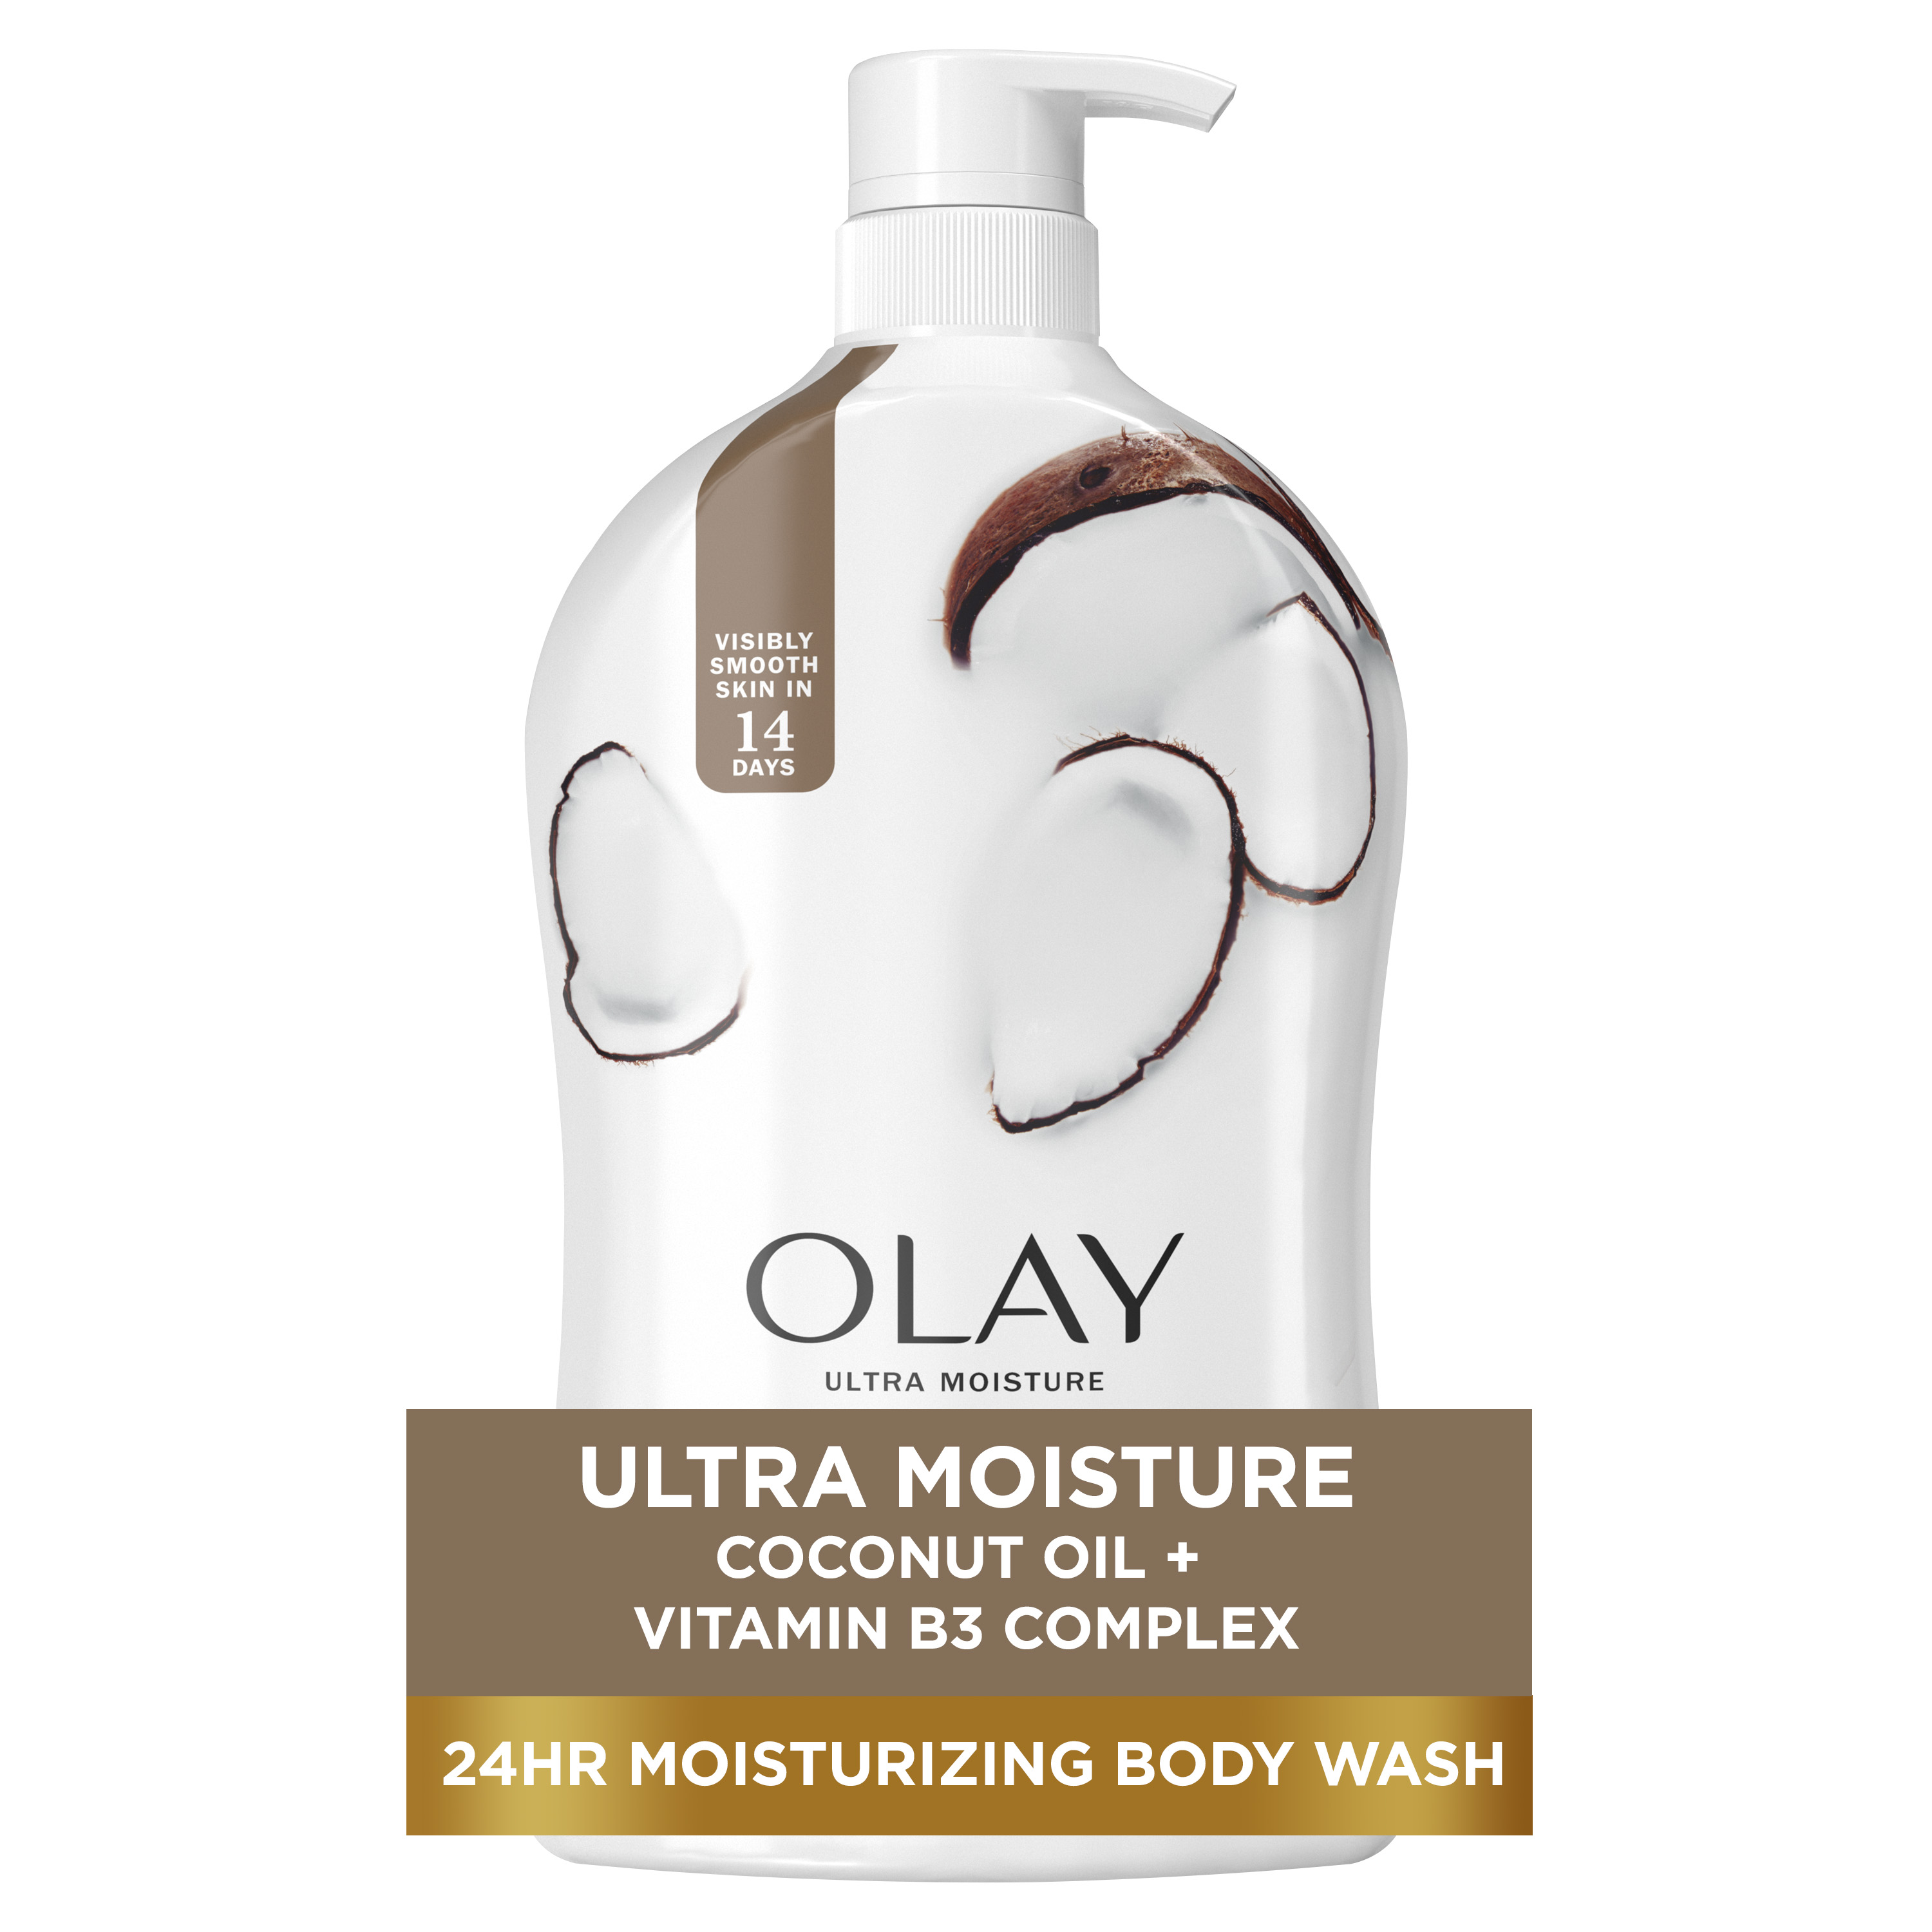 Olay Ultra Moisture Body Wash with Coconut Oil, 33 fl oz - image 1 of 11